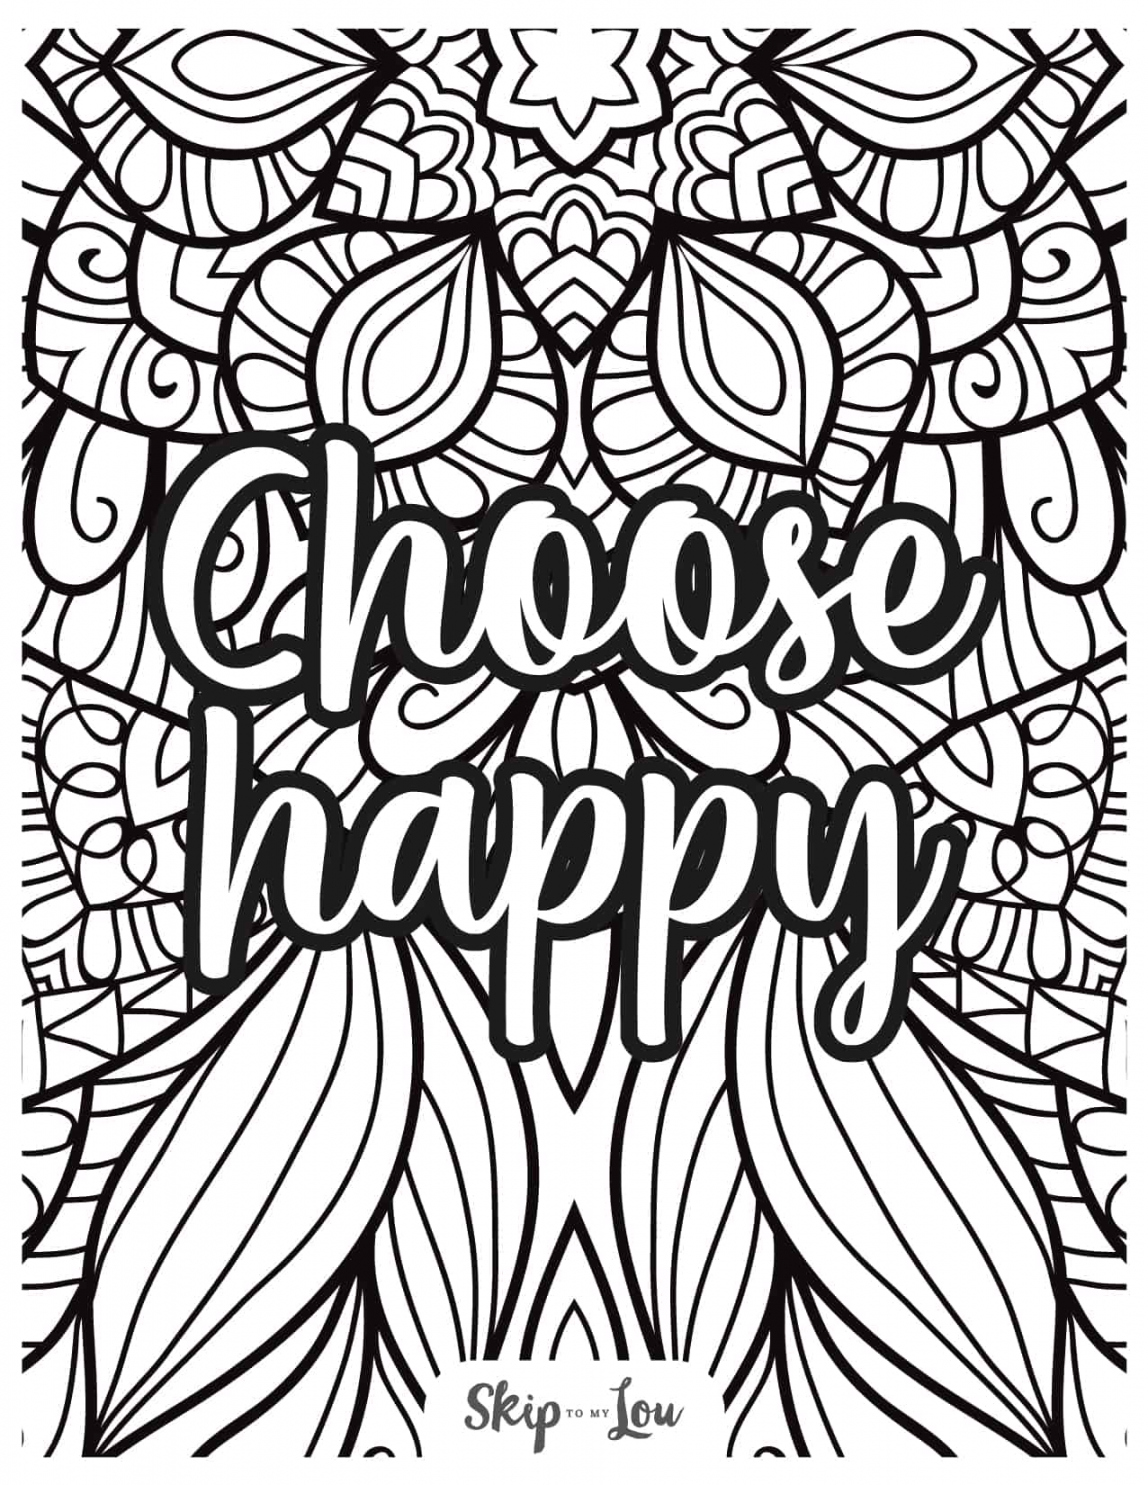 Printable Coloring Pages Free - Printable - Free Coloring Pages For Adults  Skip To My Lou